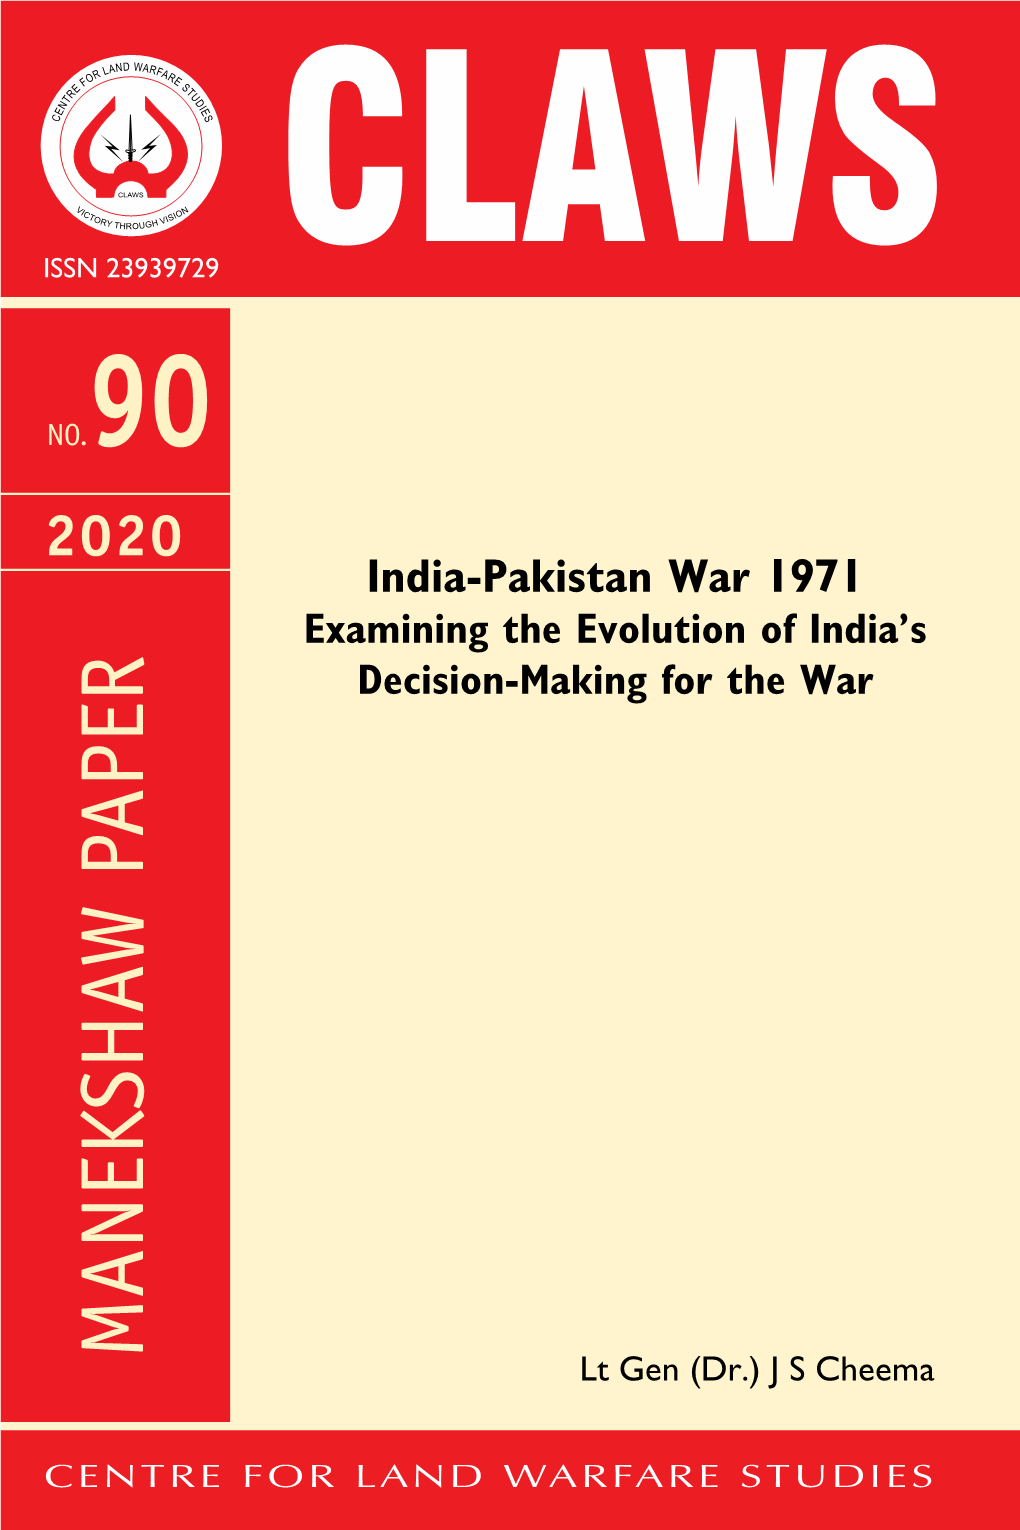 India-Pakistan War 1971 Examining the Evolution of India’S Decision-Making for the War